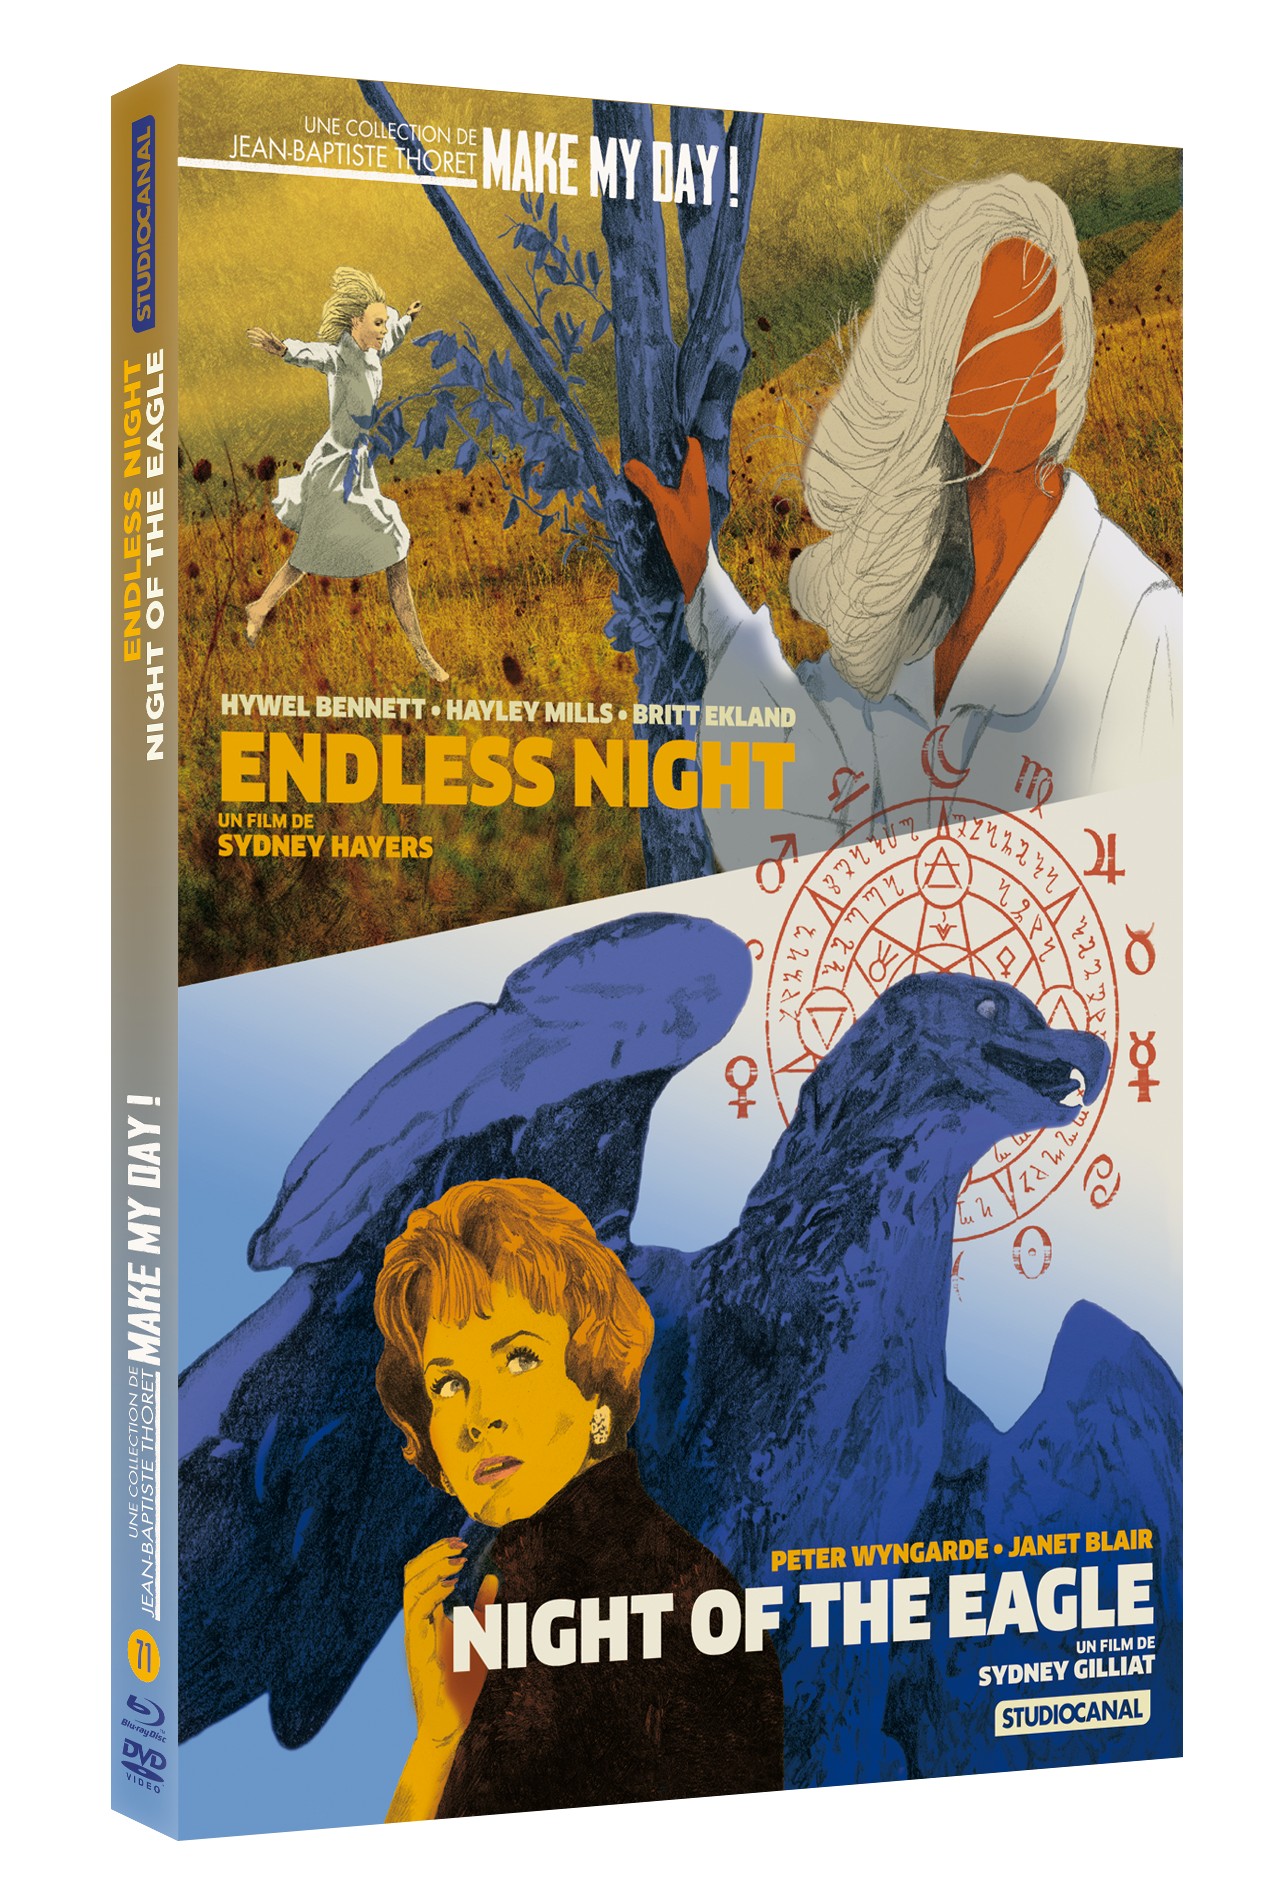 MMD 71 : NIGHT OF THE EAGLE/ENDLESS NIGHT - COMBO 2 BD + 2 DVD